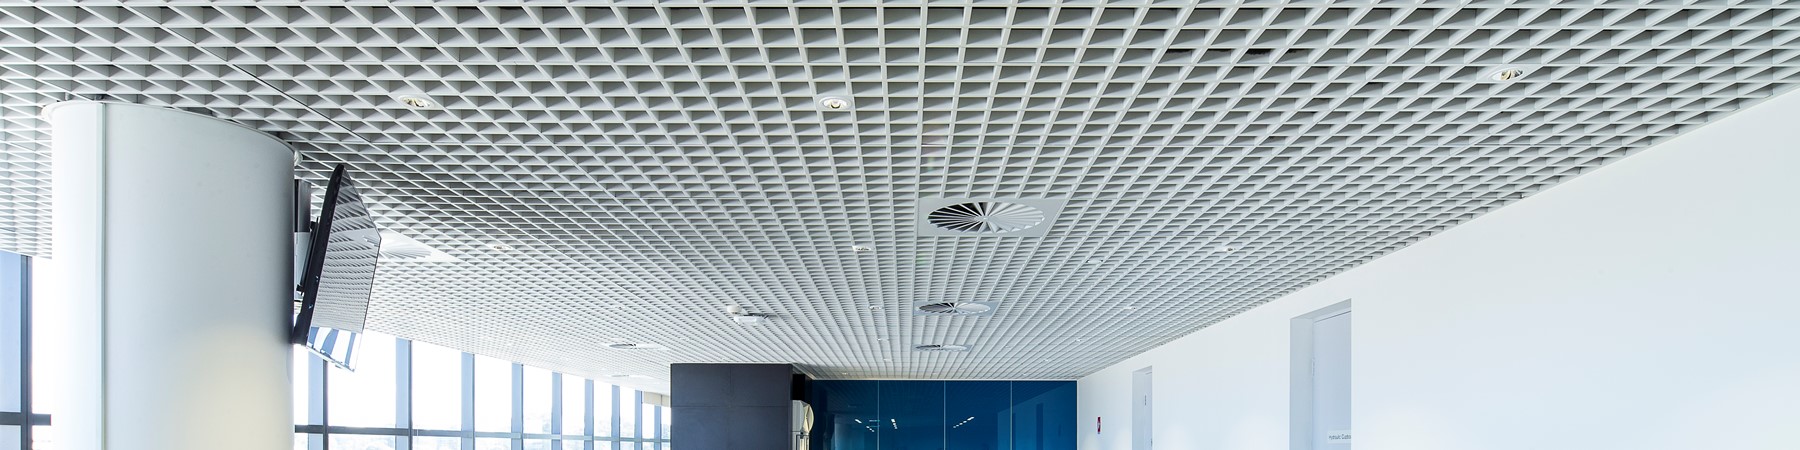 An open cell grid ceiling